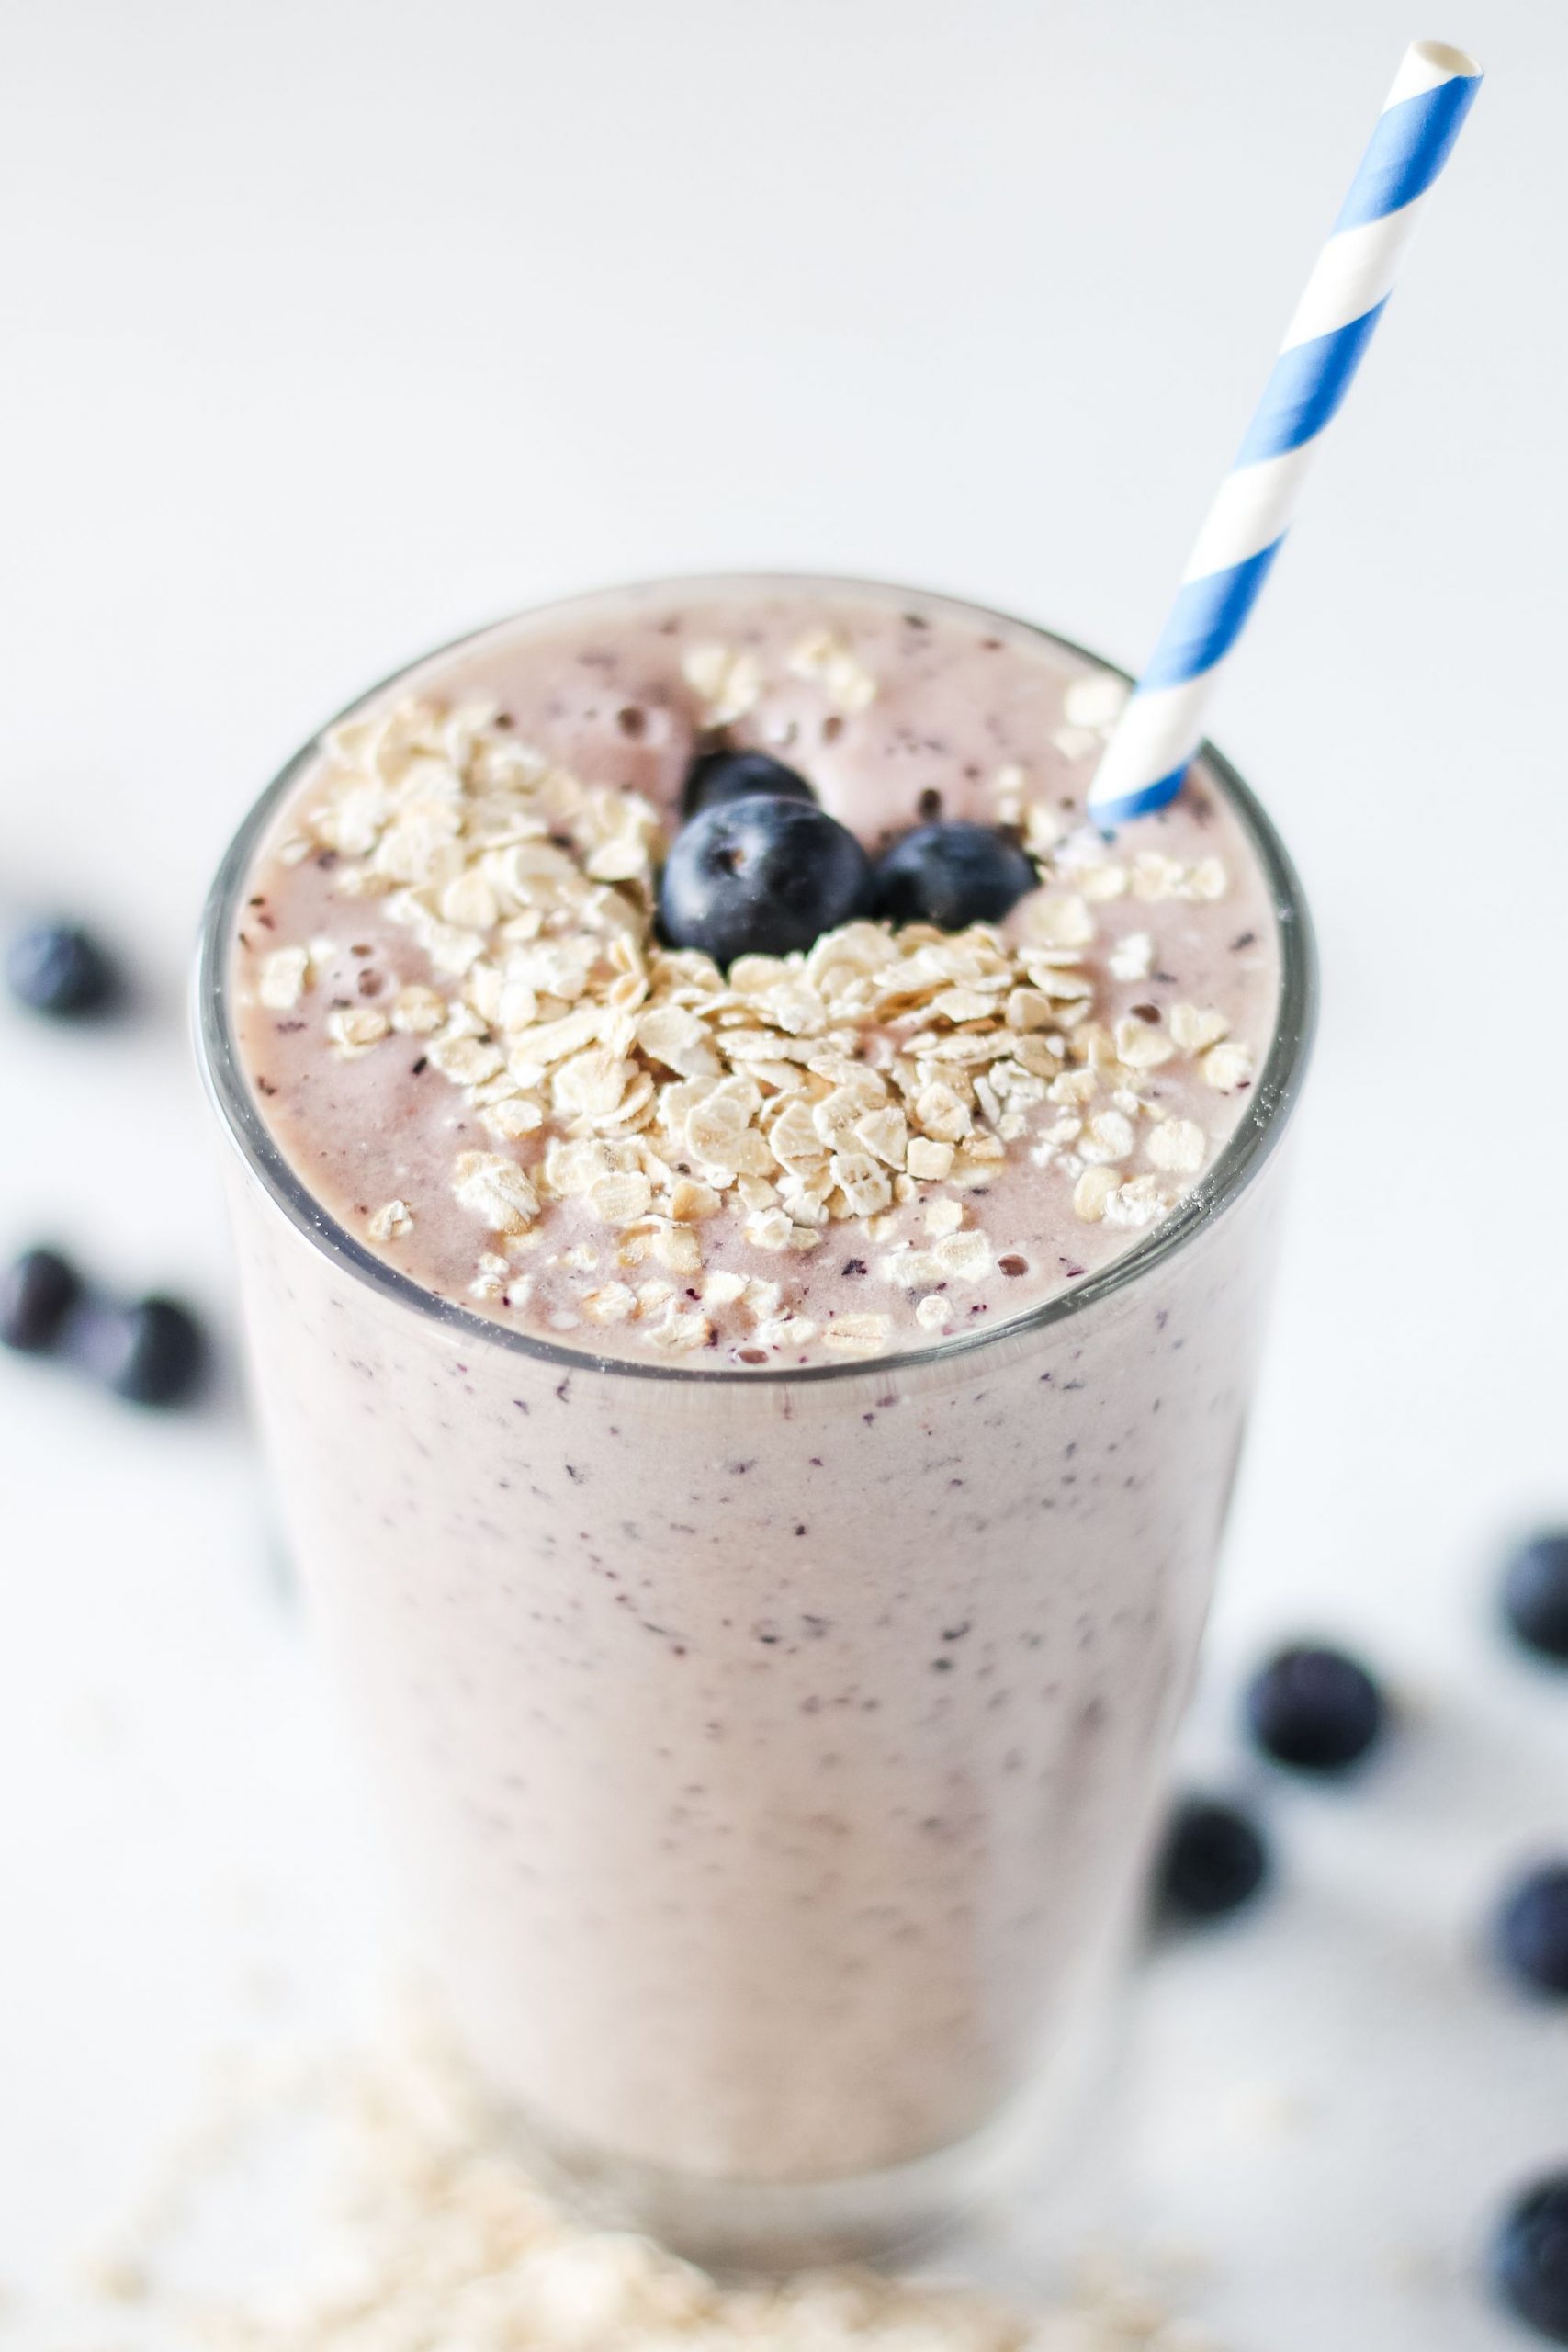 Light pink smoothie in a tall glass with a straw served with some fresh blueberries and oats on top